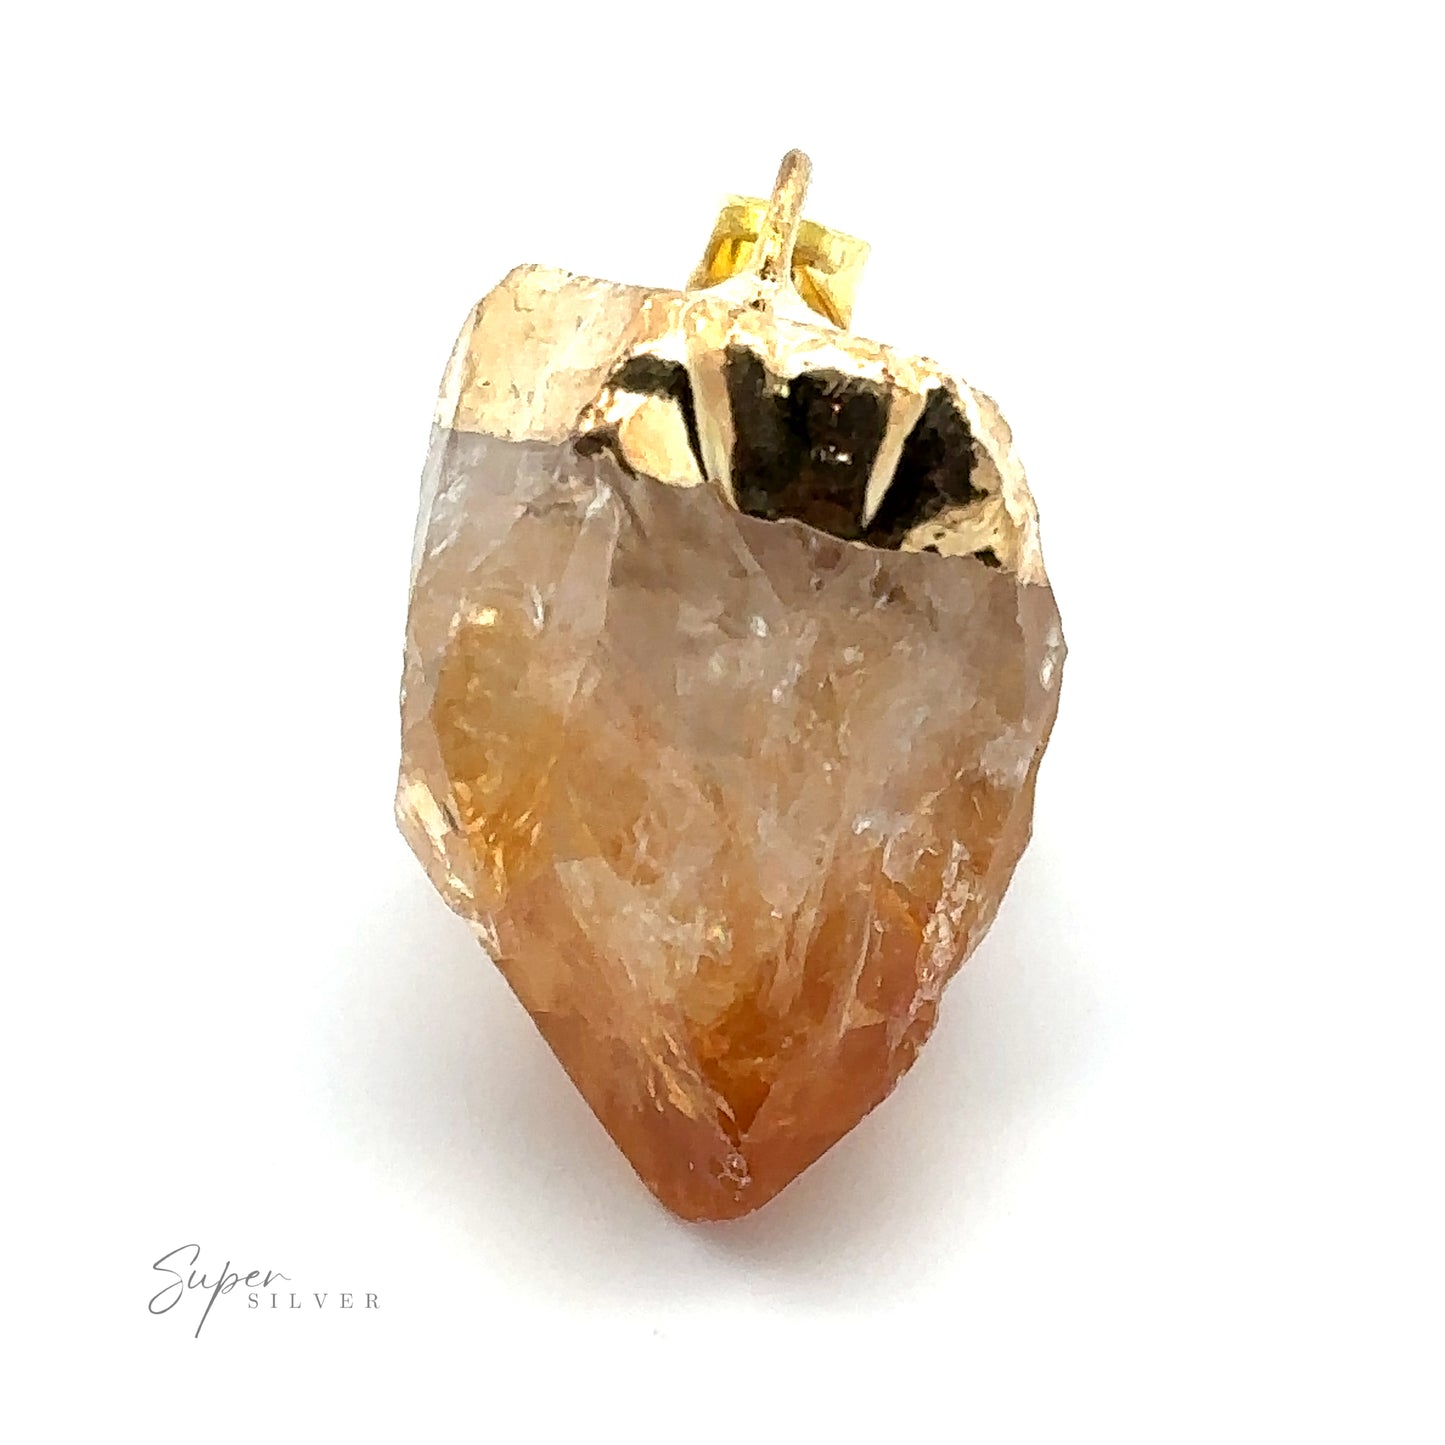 
                  
                    A Raw Crystal Pendant With Gold Cap featuring a raw crystal encased in a gold plated cap, with an orange and clear gradient. The image has a "Super Silver" watermark at the bottom left corner.
                  
                